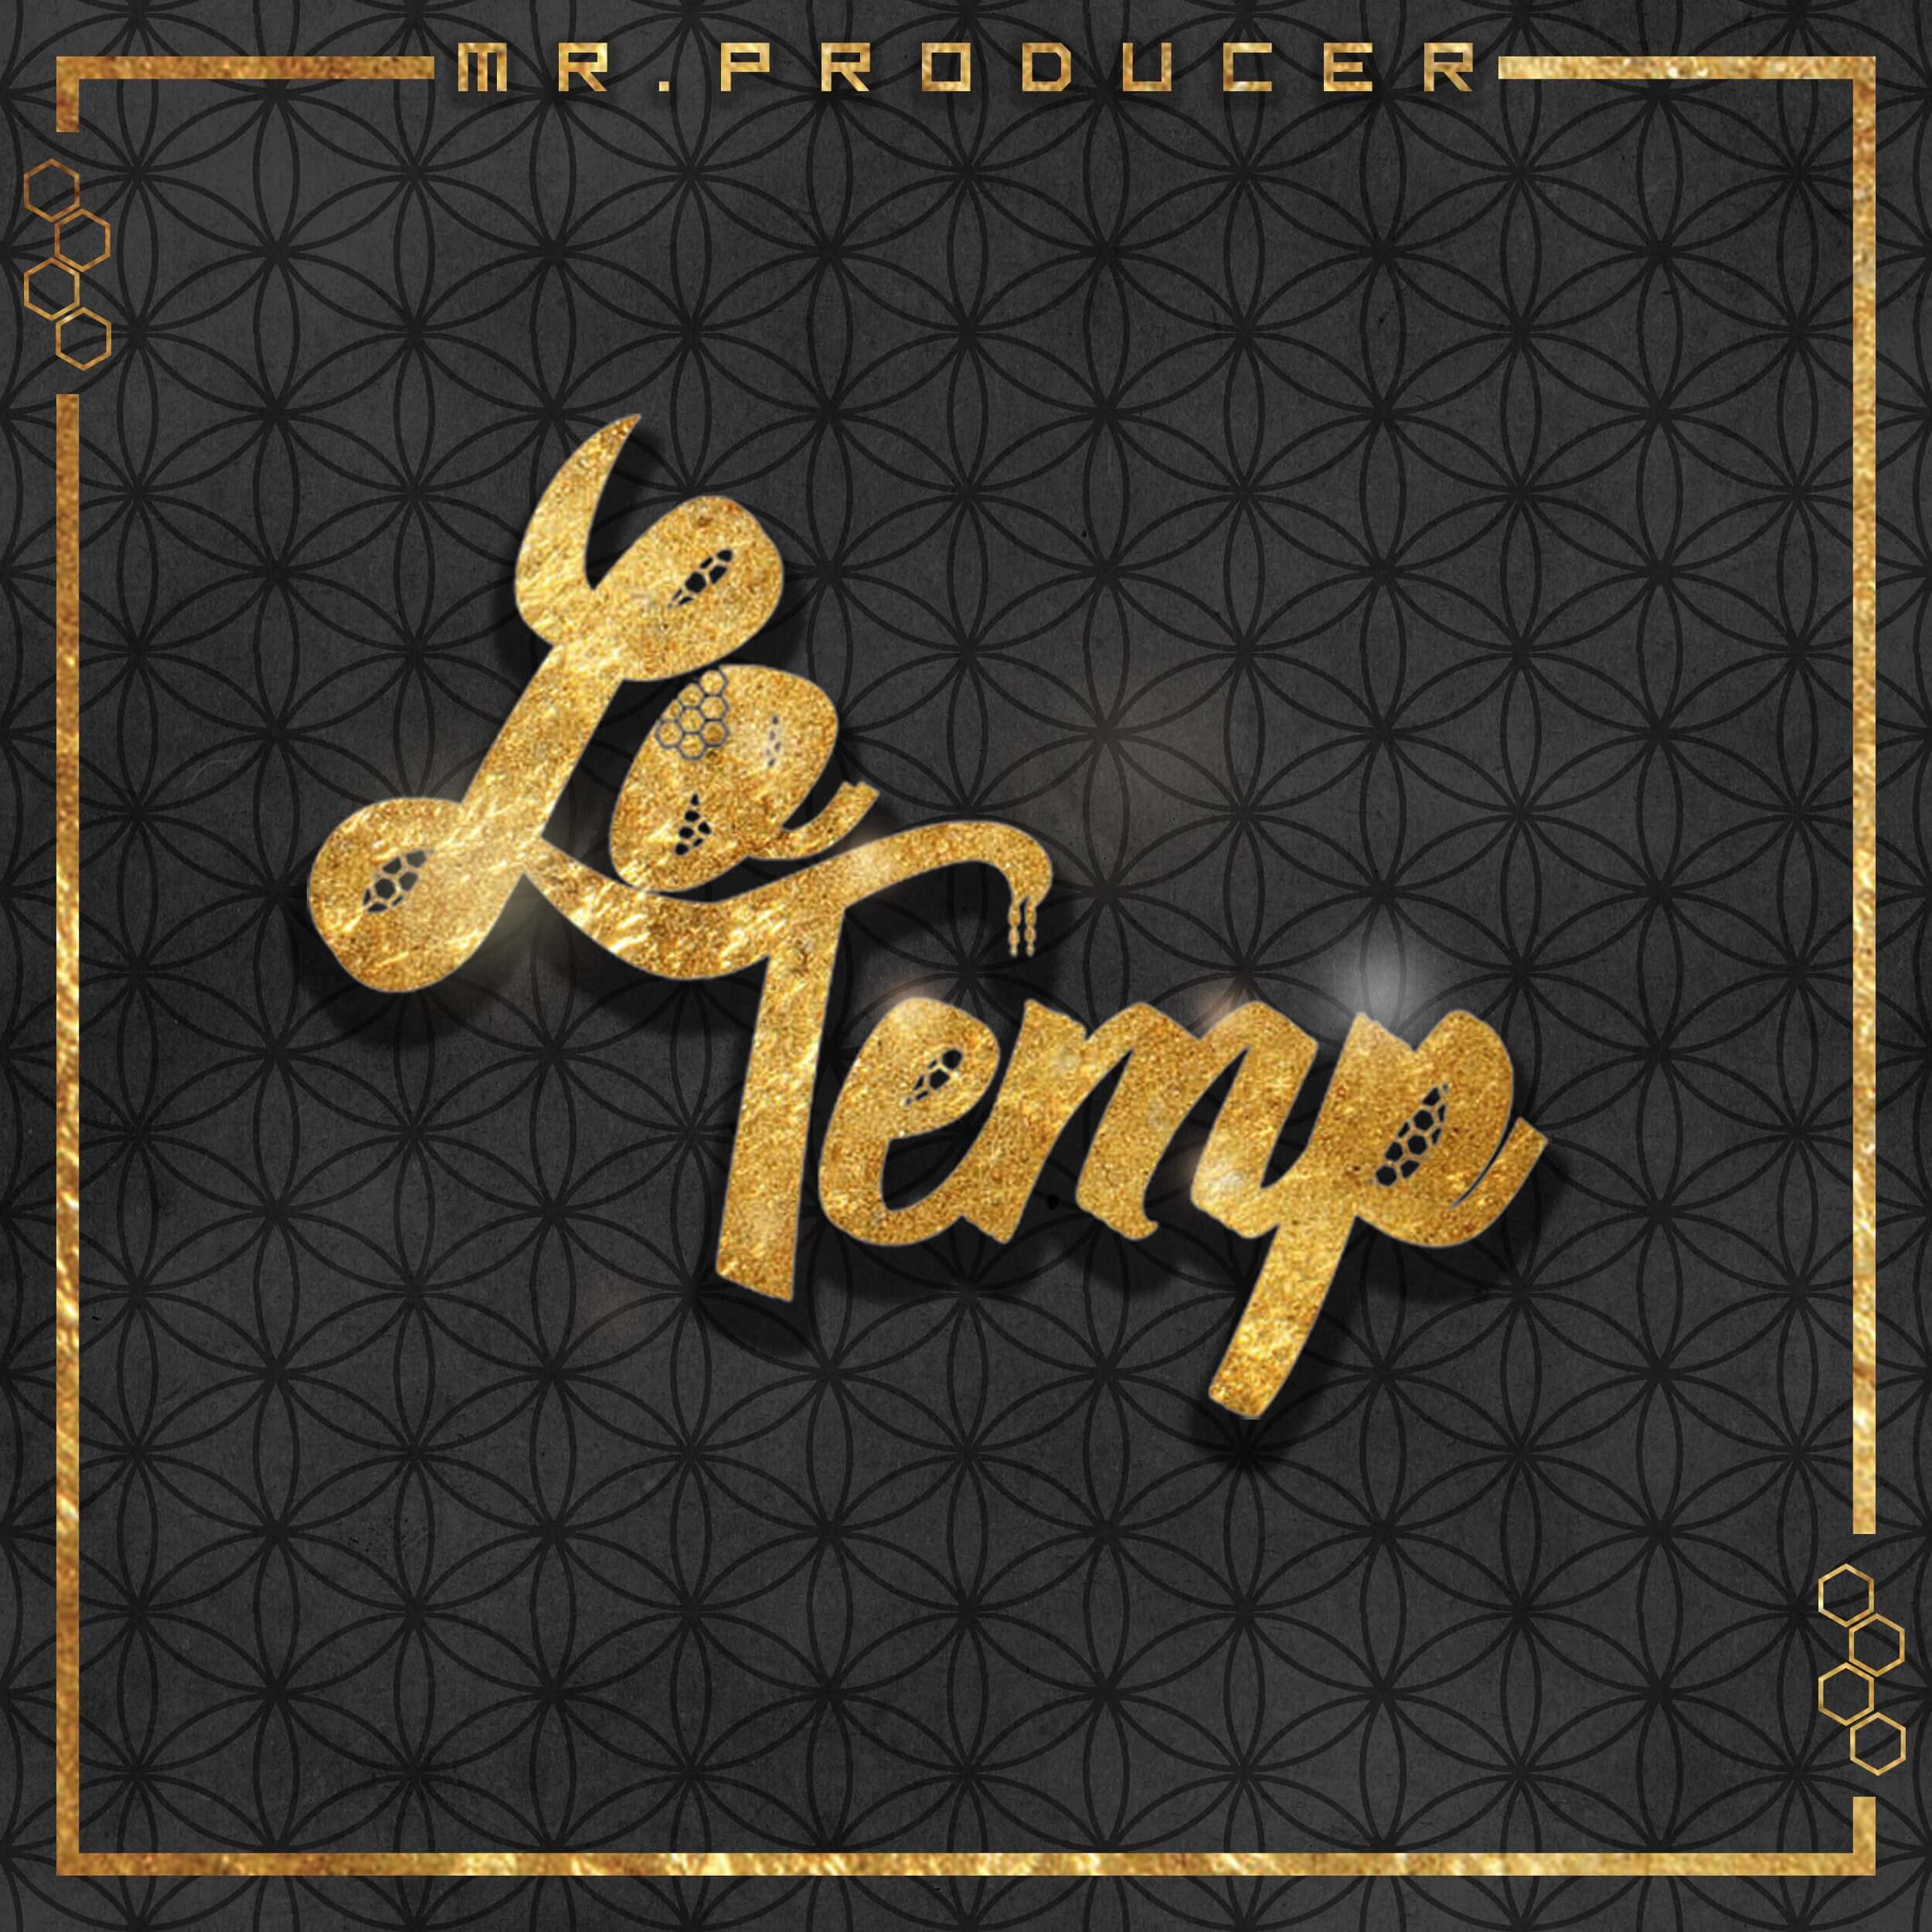 LoTemp Brings The Heat with Latest Release ‘Mr. Producer’